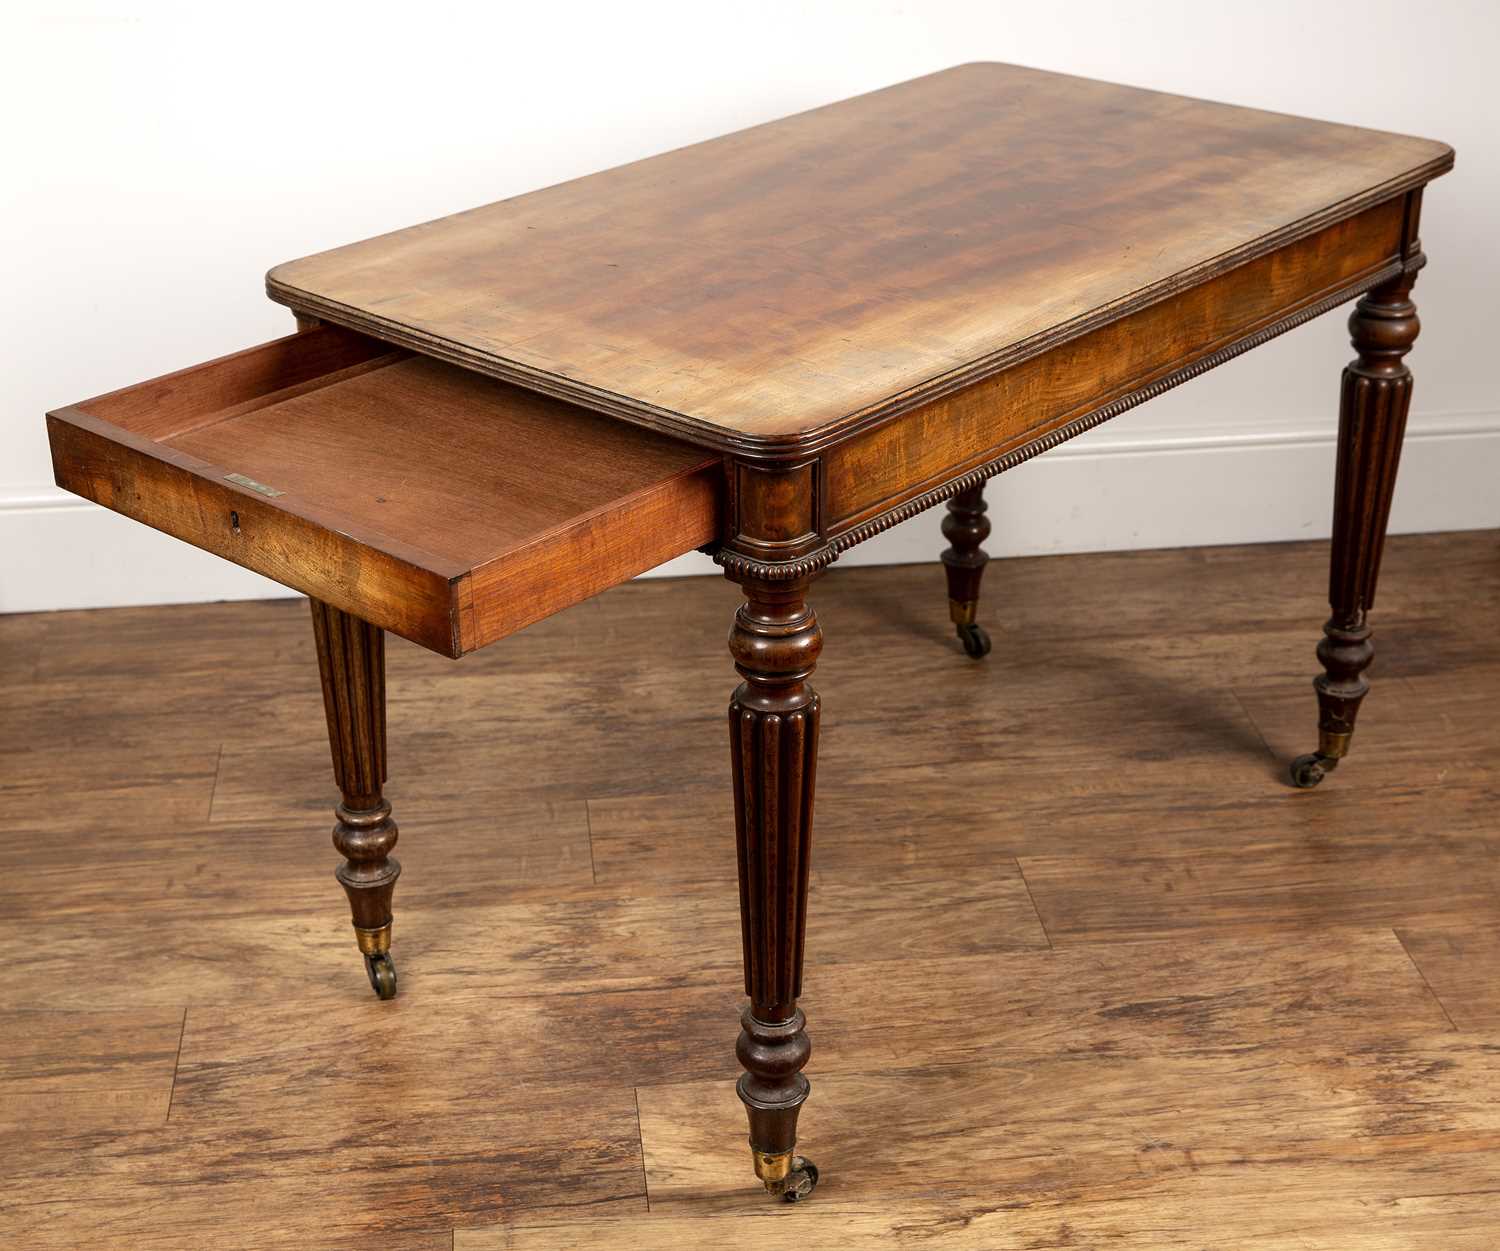 Gillows style mahogany desk or table 19th Century, with large double-sided single drawer, with - Image 3 of 5